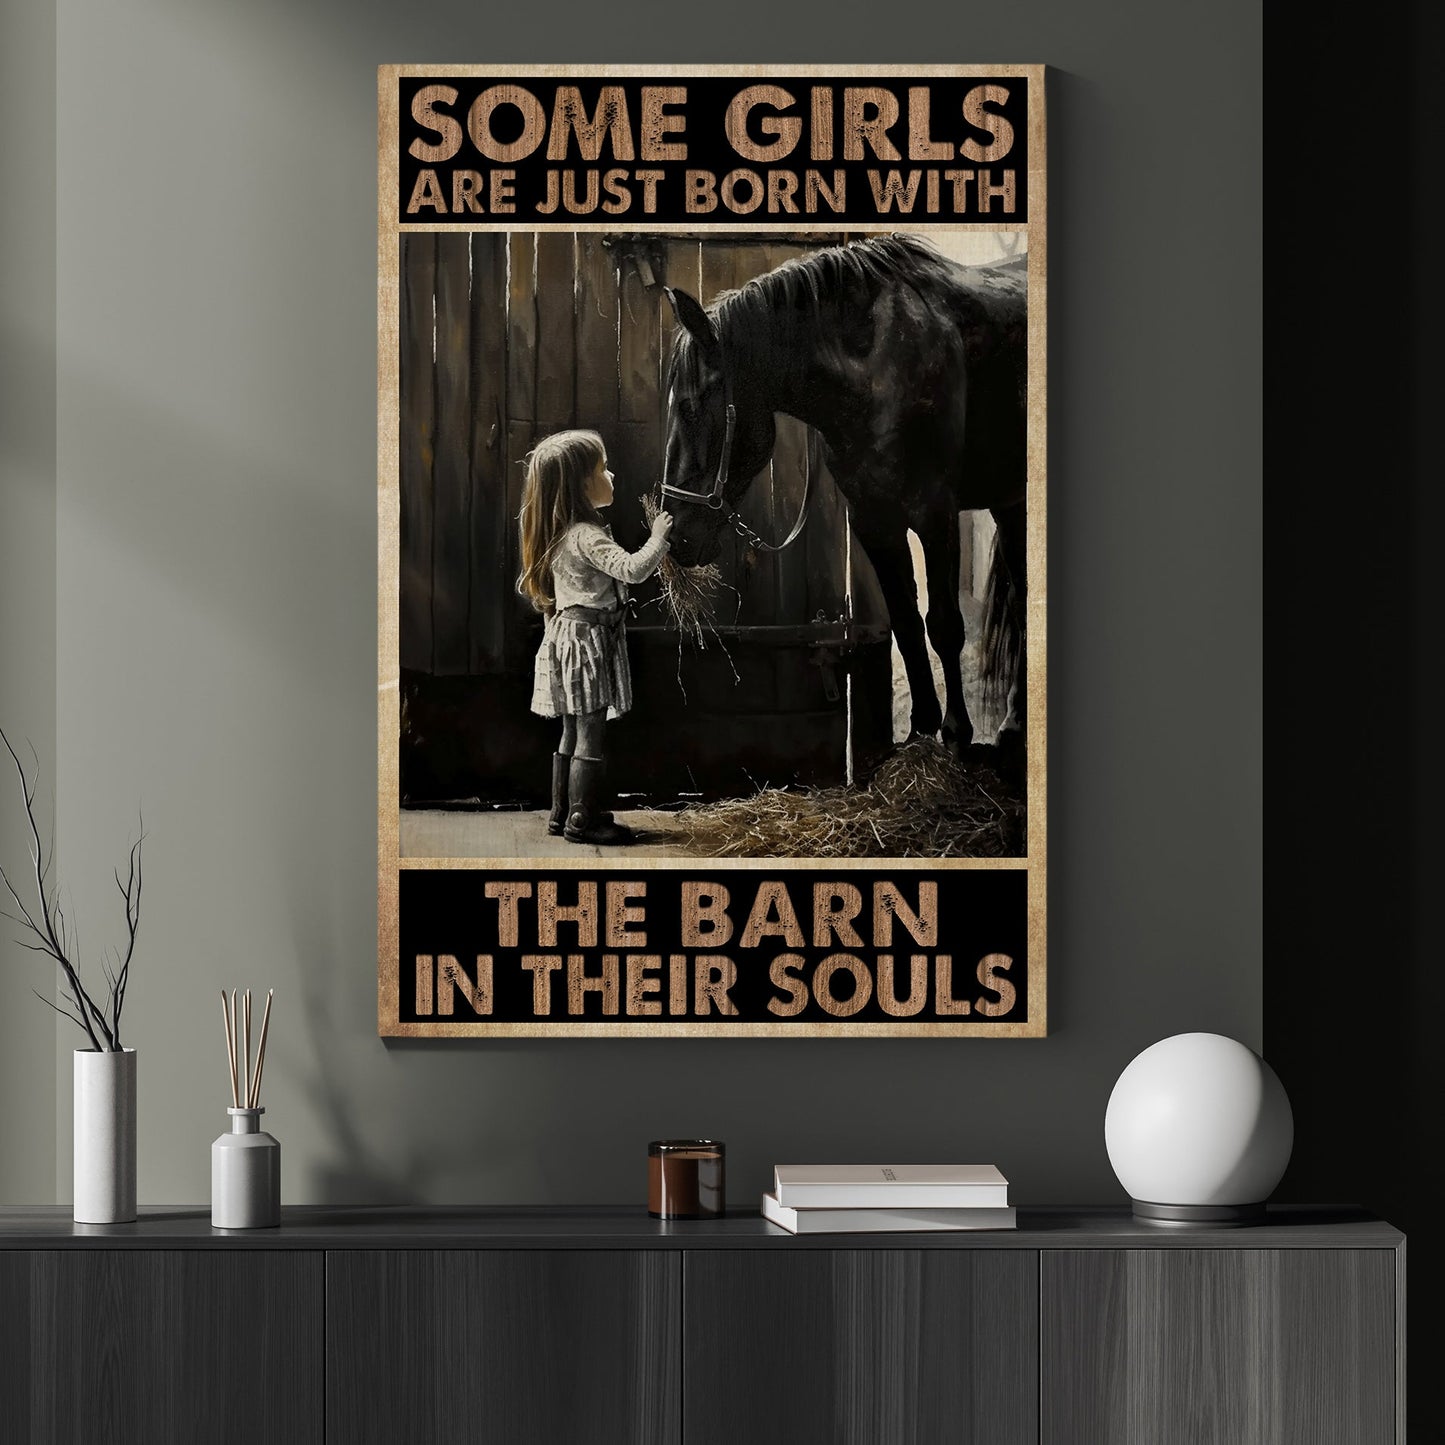 Some Girl Are Just Born With The Barn, Motivational Horse Girl Canvas Painting, Inspirational Quotes Wall Art Decor, Poster Gift For Horse Girl Lovers